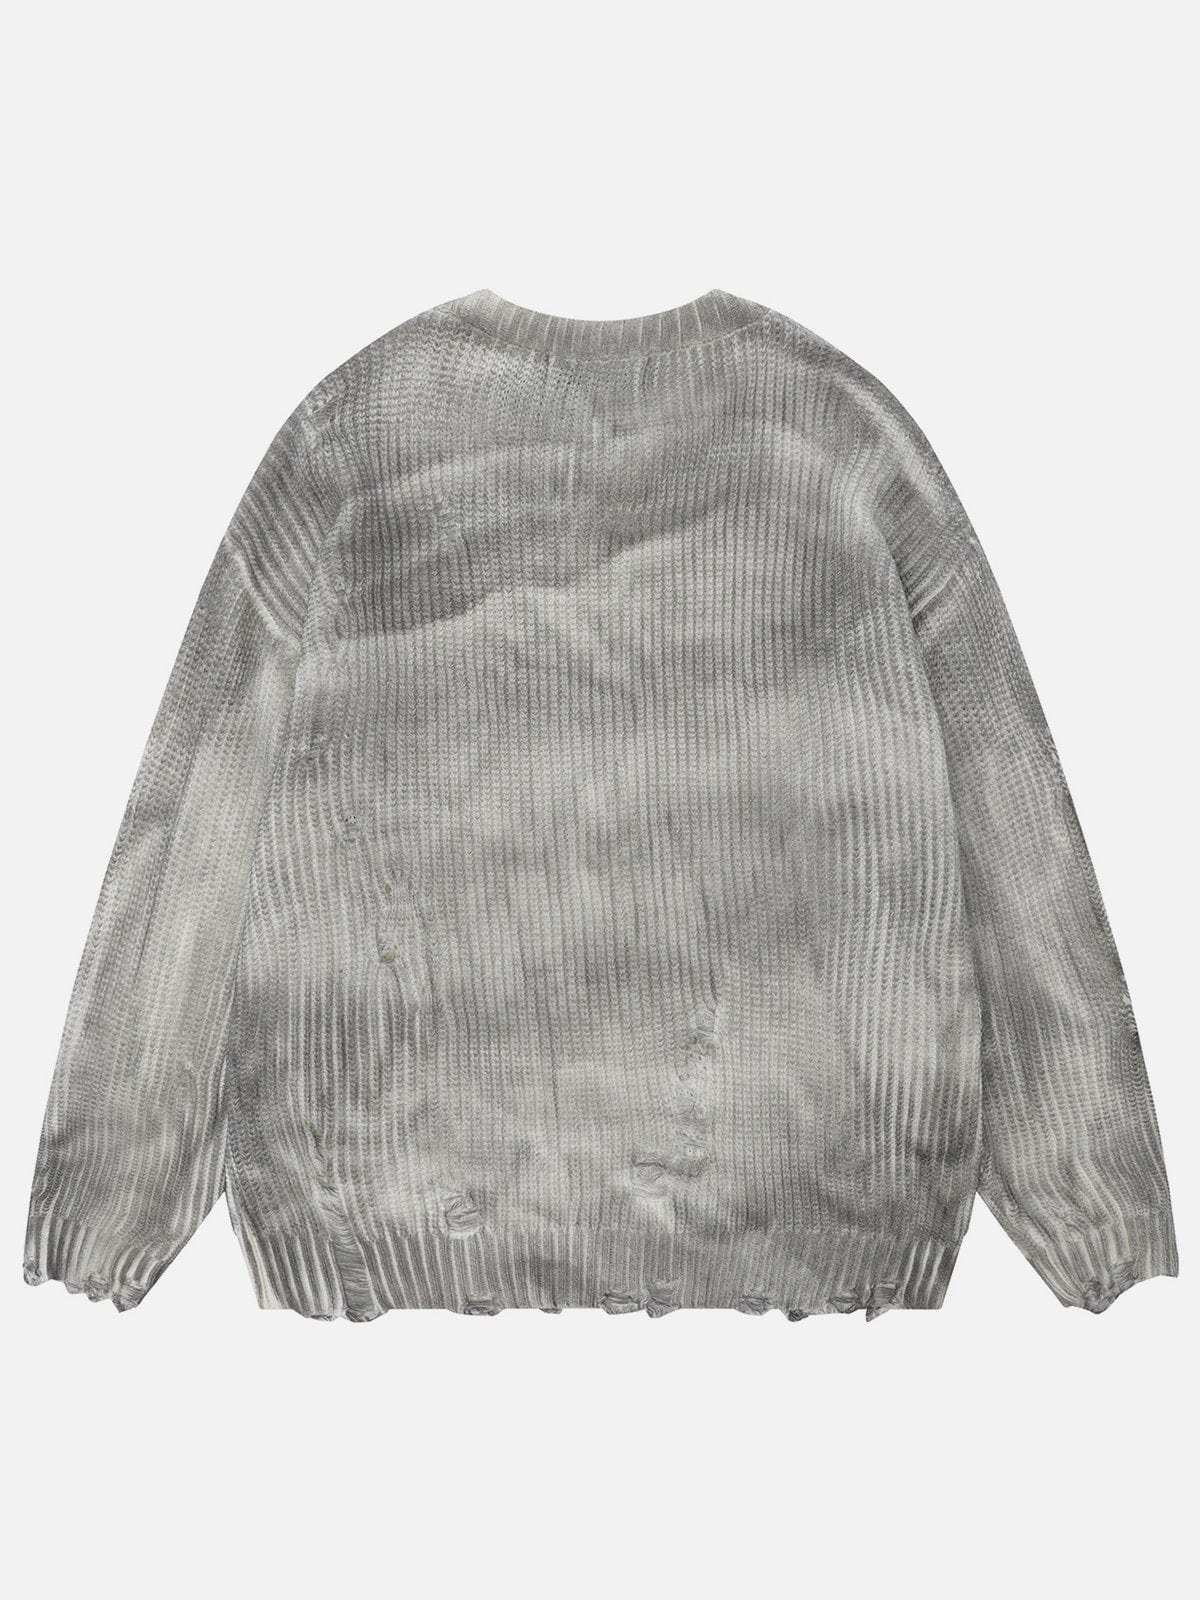 NEV Distressed Hole Ribbed Sweater